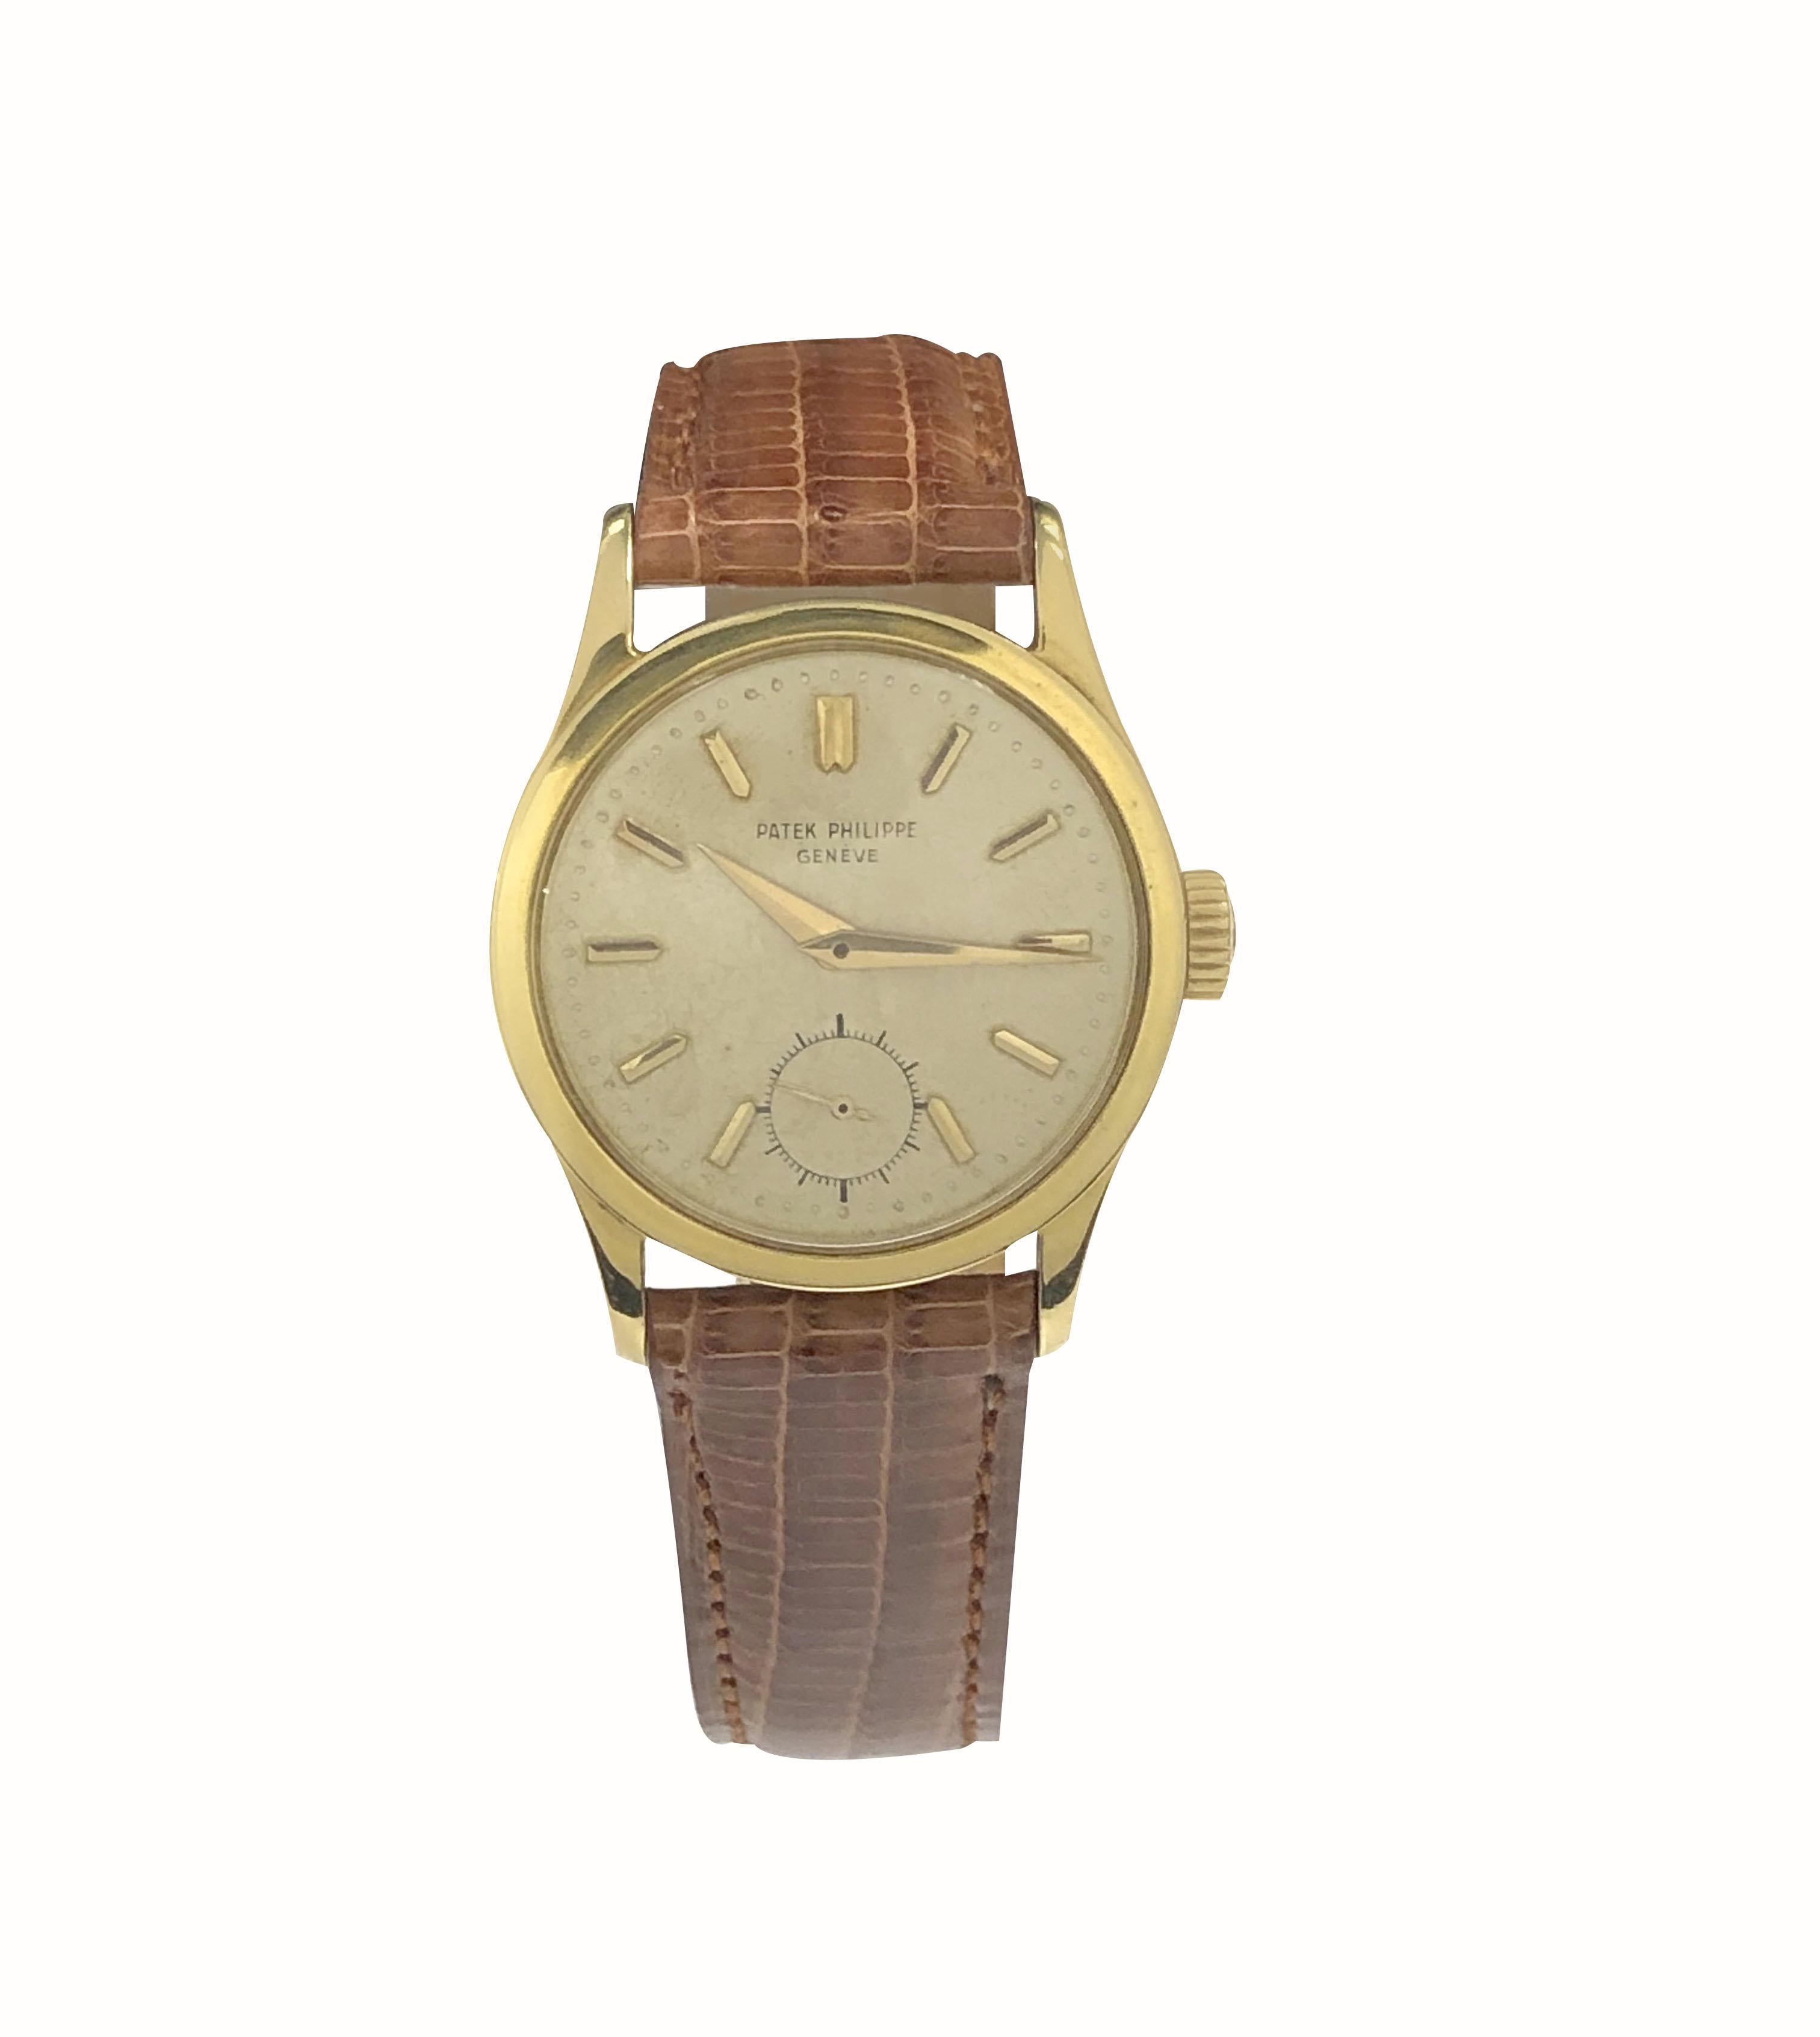 Circa 1950s Patek Philippe Calatrava Reference 2545, 32 M.M. 18K yellow Gold 2 piece case with Water Proof Back, 18 Jewel, Caliber  12-400 Mechanical, Manual wind nickle Lever movement, Patek Philippe Logo Crown.  Silver Satin Dial with Raised Gold